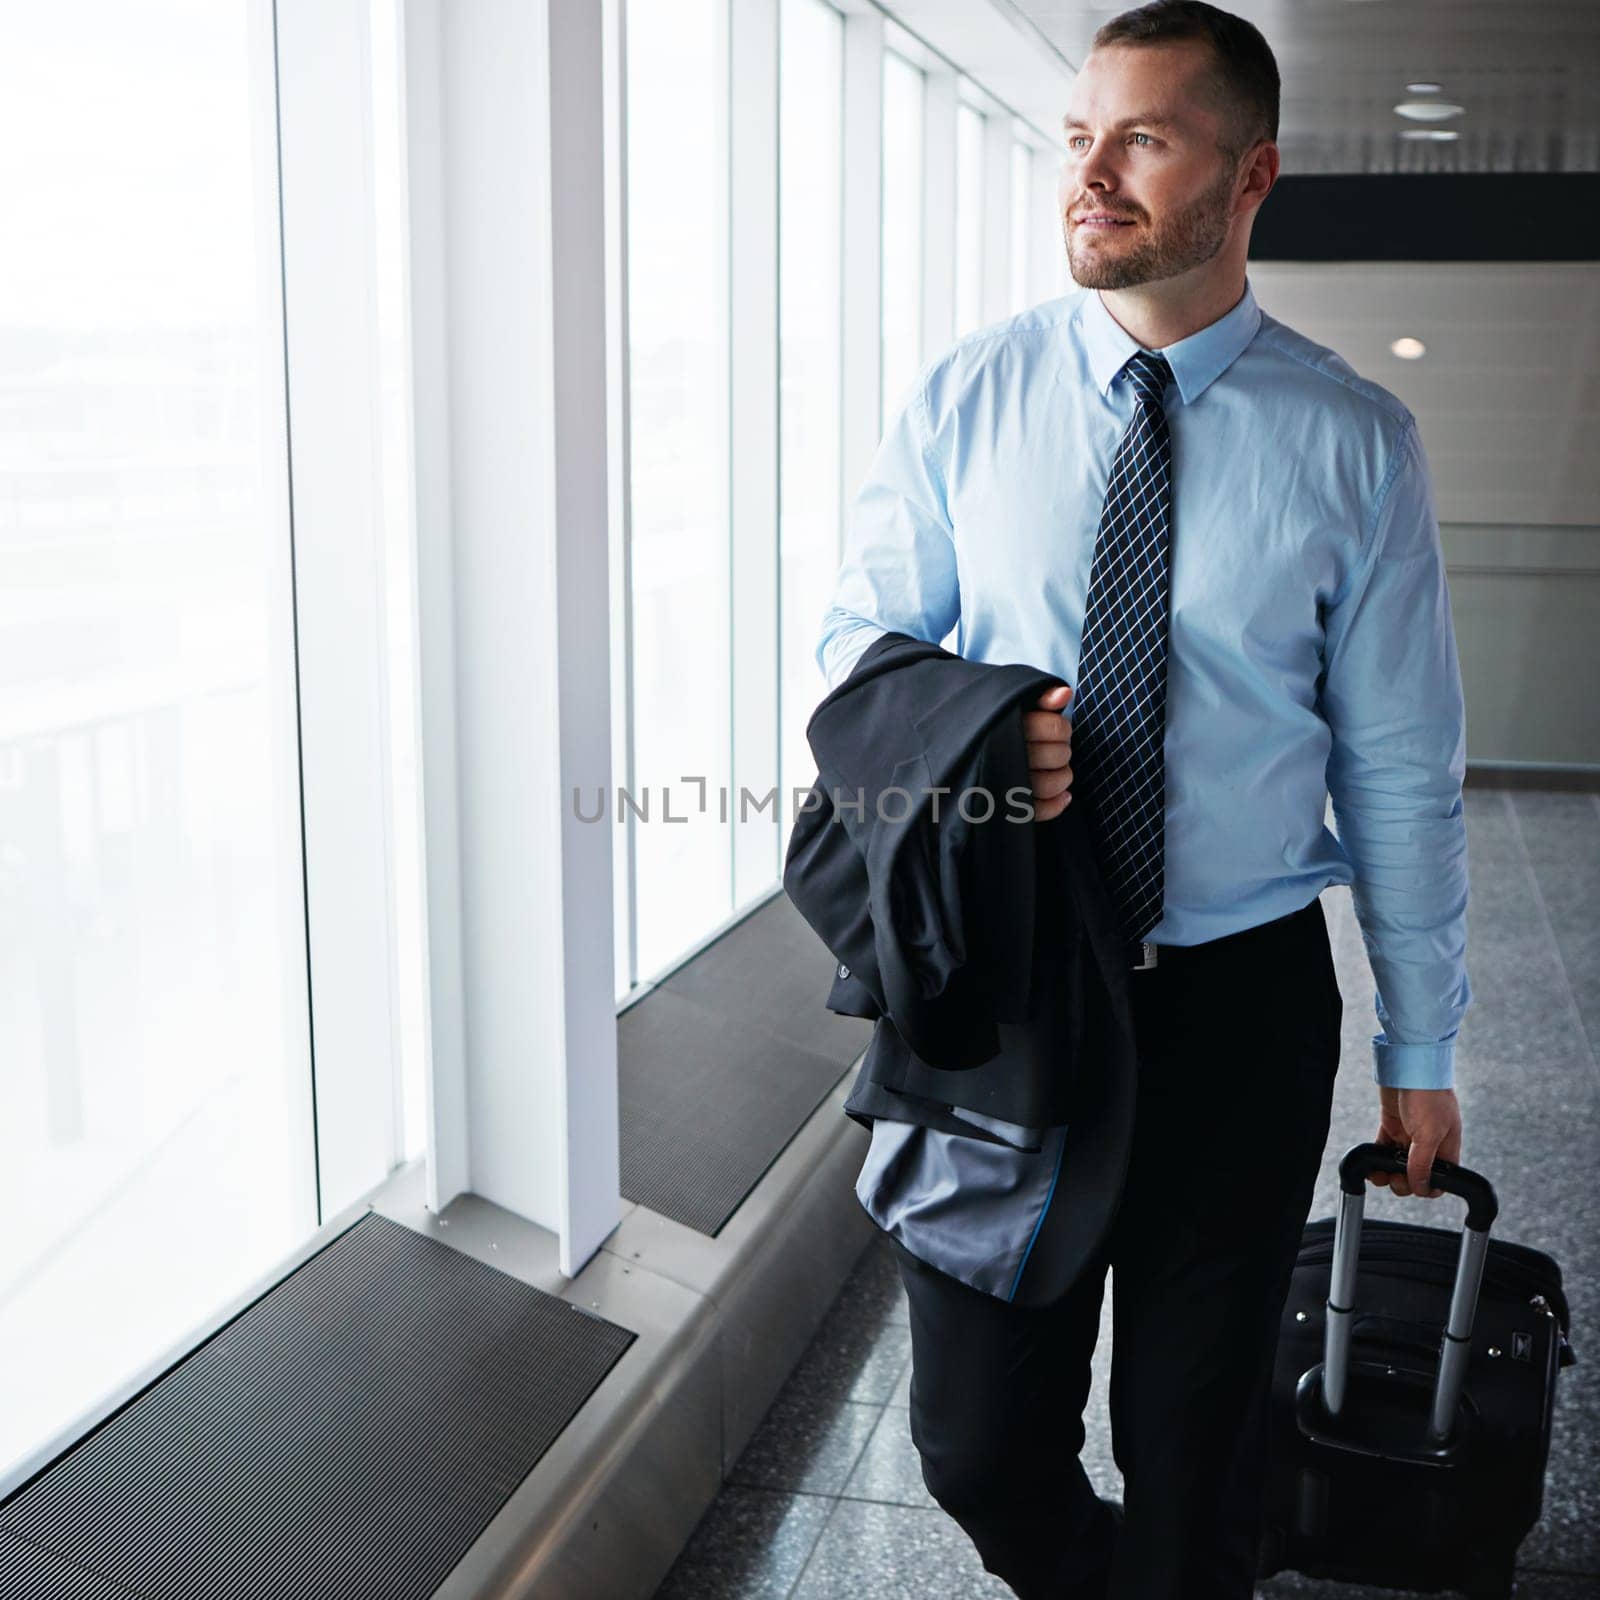 Walking, flight or businessman in airport thinking of company trip with suitcase or luggage for commute. Proud manager, idea or corporate worker in hall for journey or international travel by window.